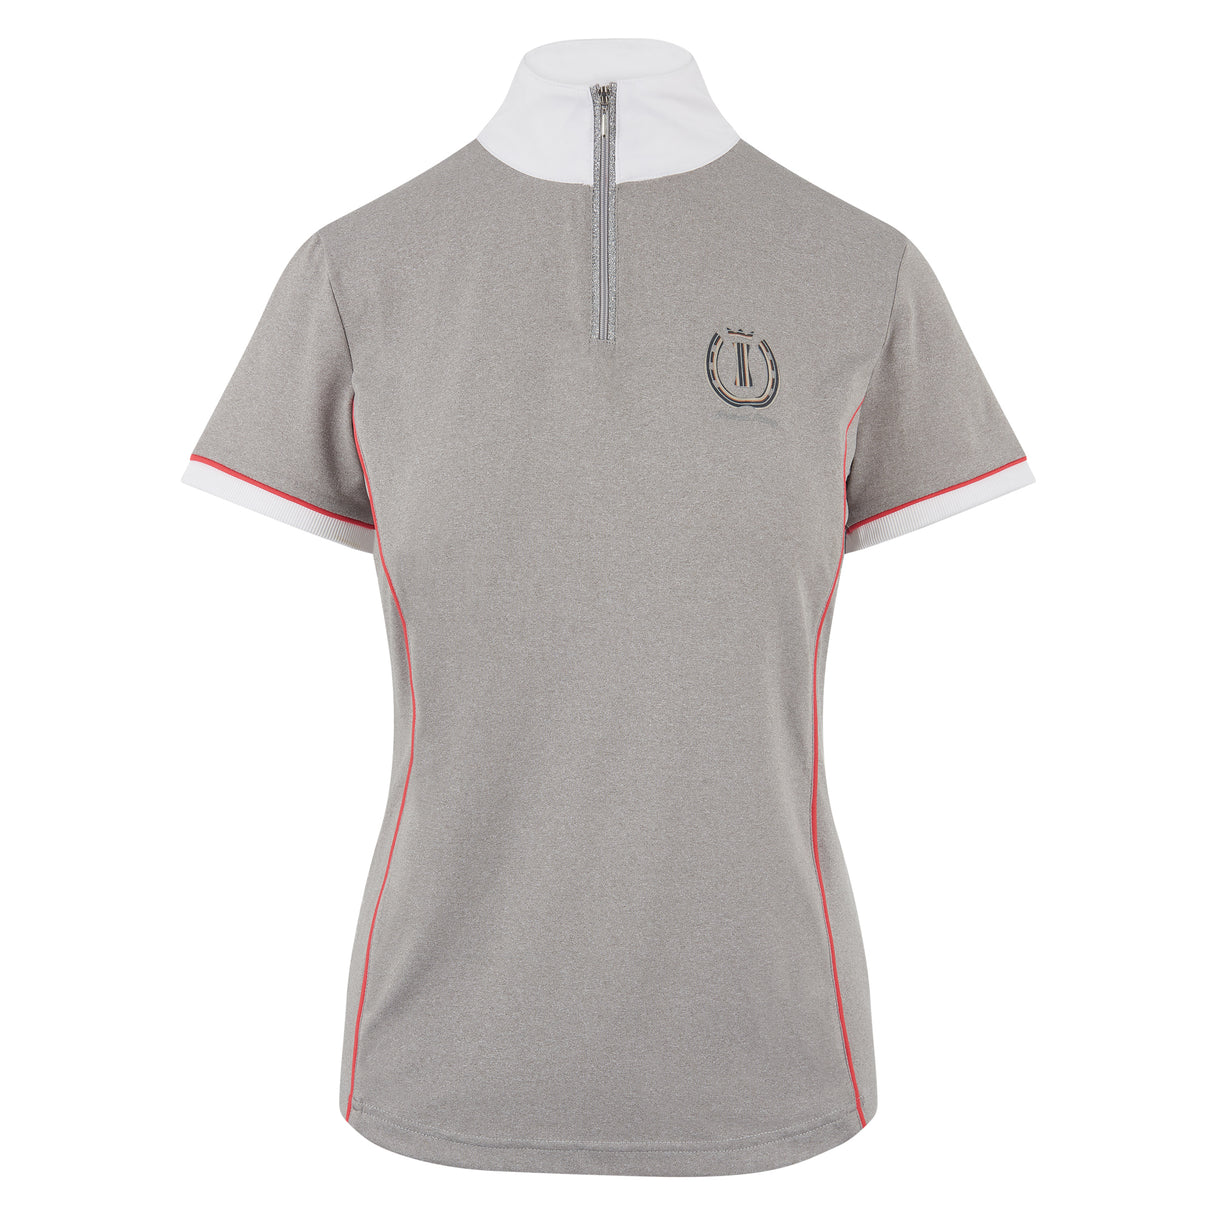 Imperial Riding Super Power Competition Shirt #colour_grey